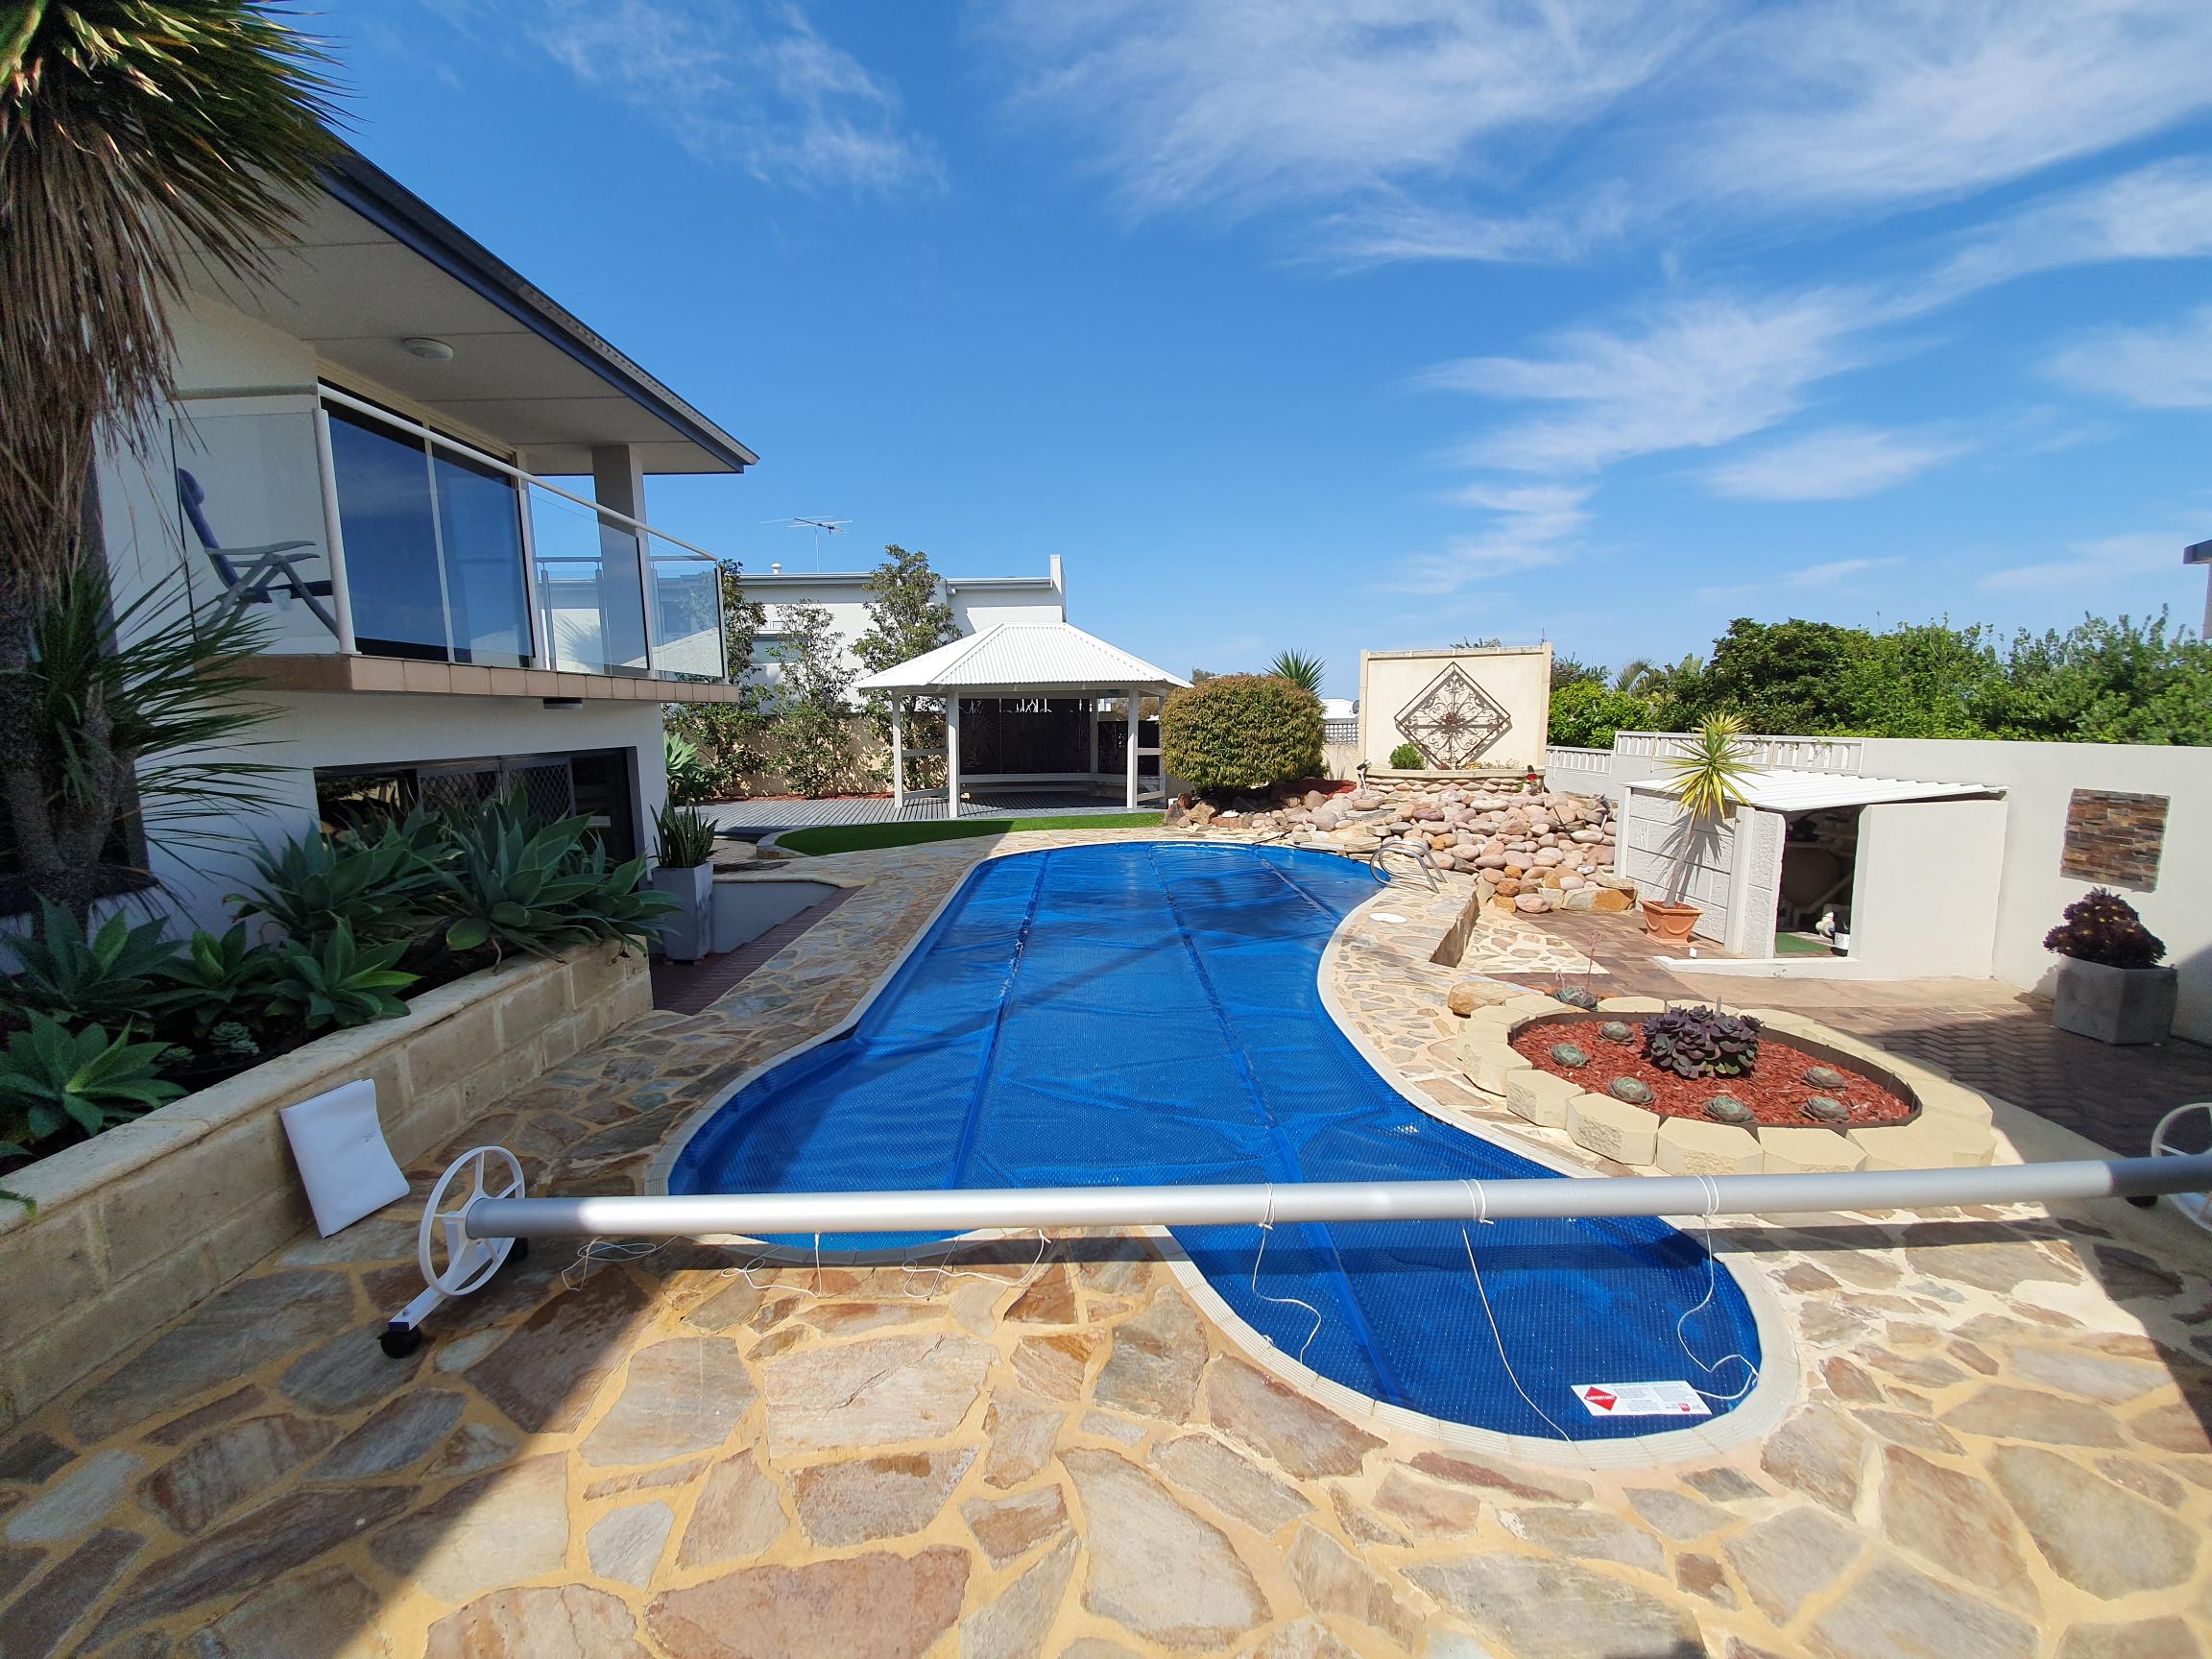 An unsually shaped pool over in WA utilised a nice, wide LP roller to make life easier.